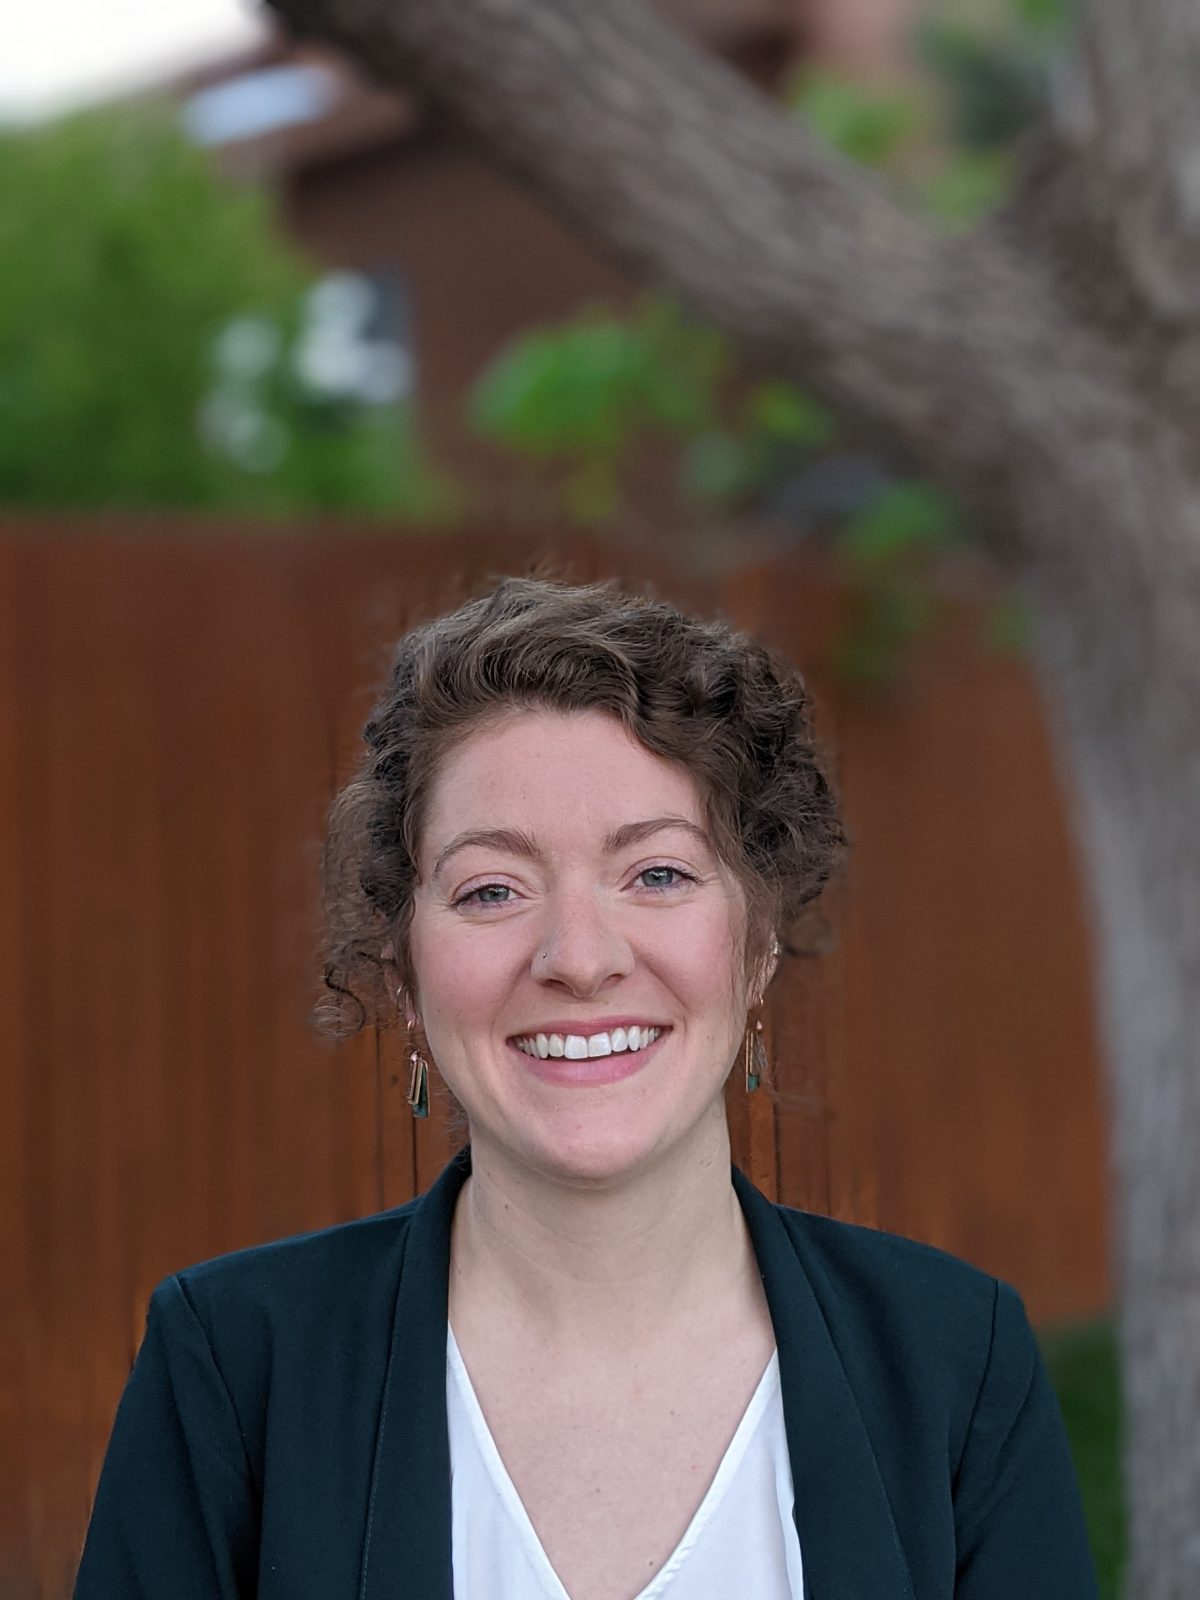 Picture of Molly O'Hara. Molly is a person with pale skin and brown curly hair which is short. She is wearing earrings, a dark blazer, and a white shirt. She is smiling. The background is blurry but shows a tree and the side of a building.